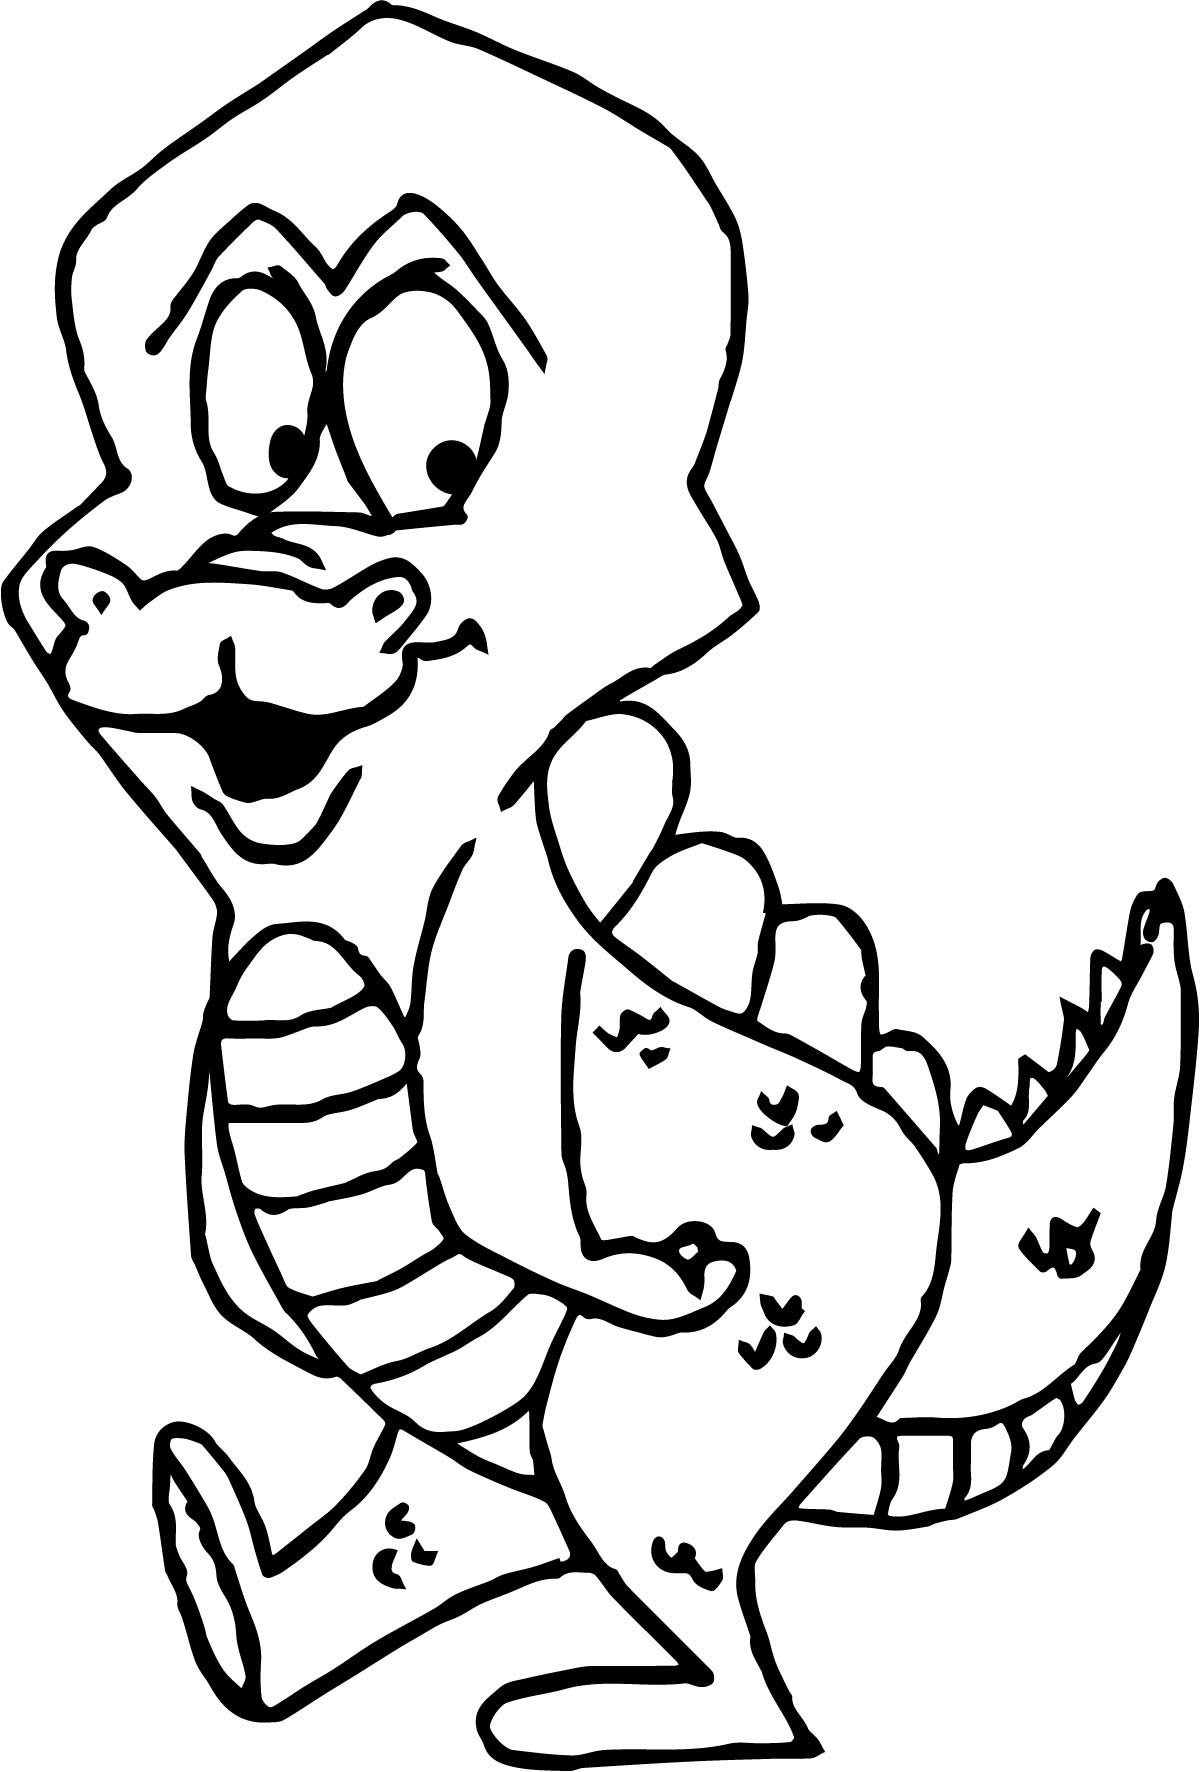 Baby Farm Animals Coloring Pages
 Baby Dinosaur Animal Farm Coloring Page